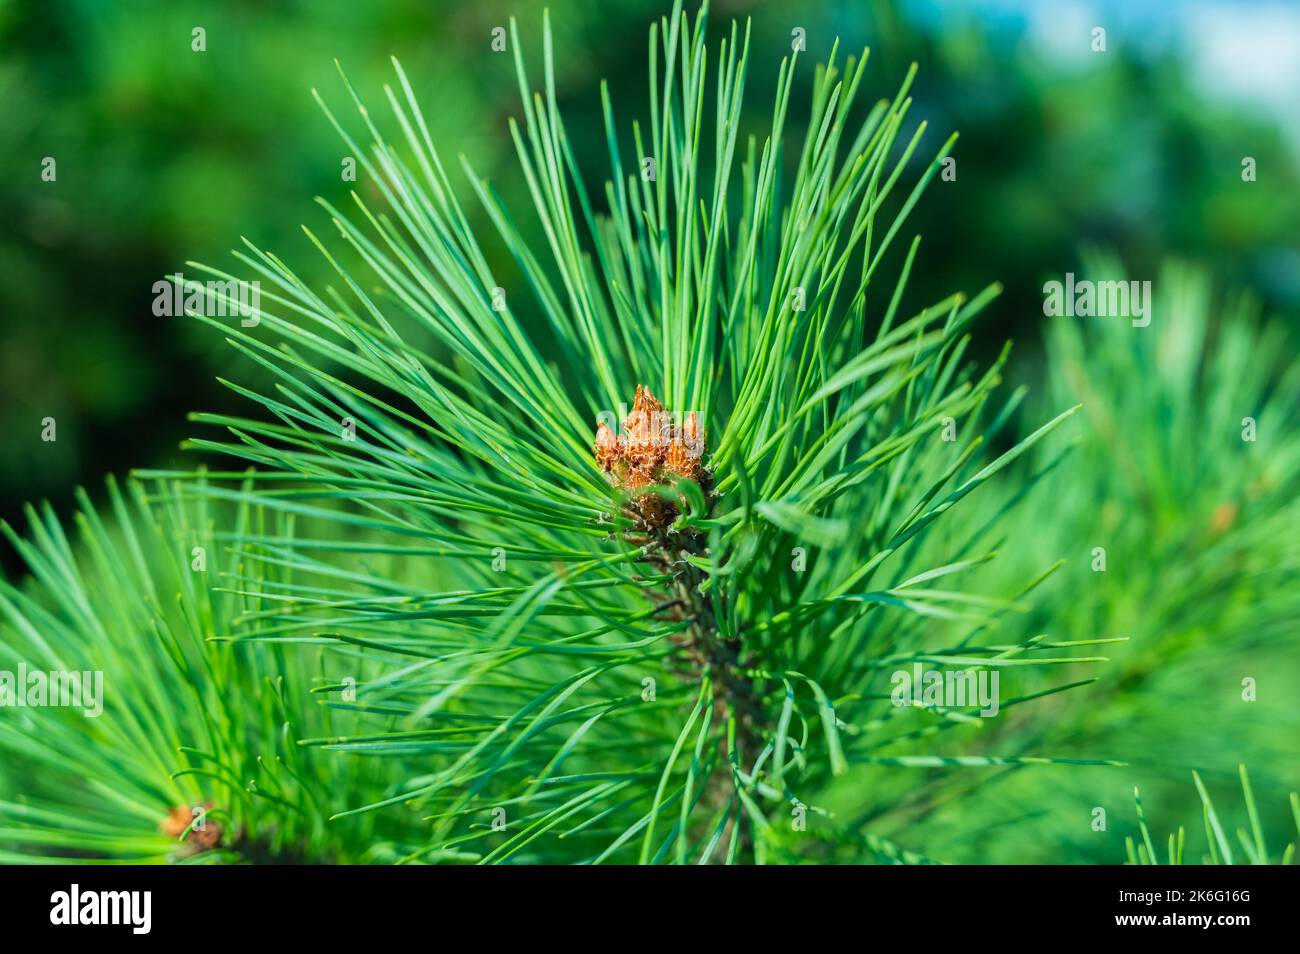 Pine branches at sunlight. Selective focus. Shallow depth of field. Stock Photo